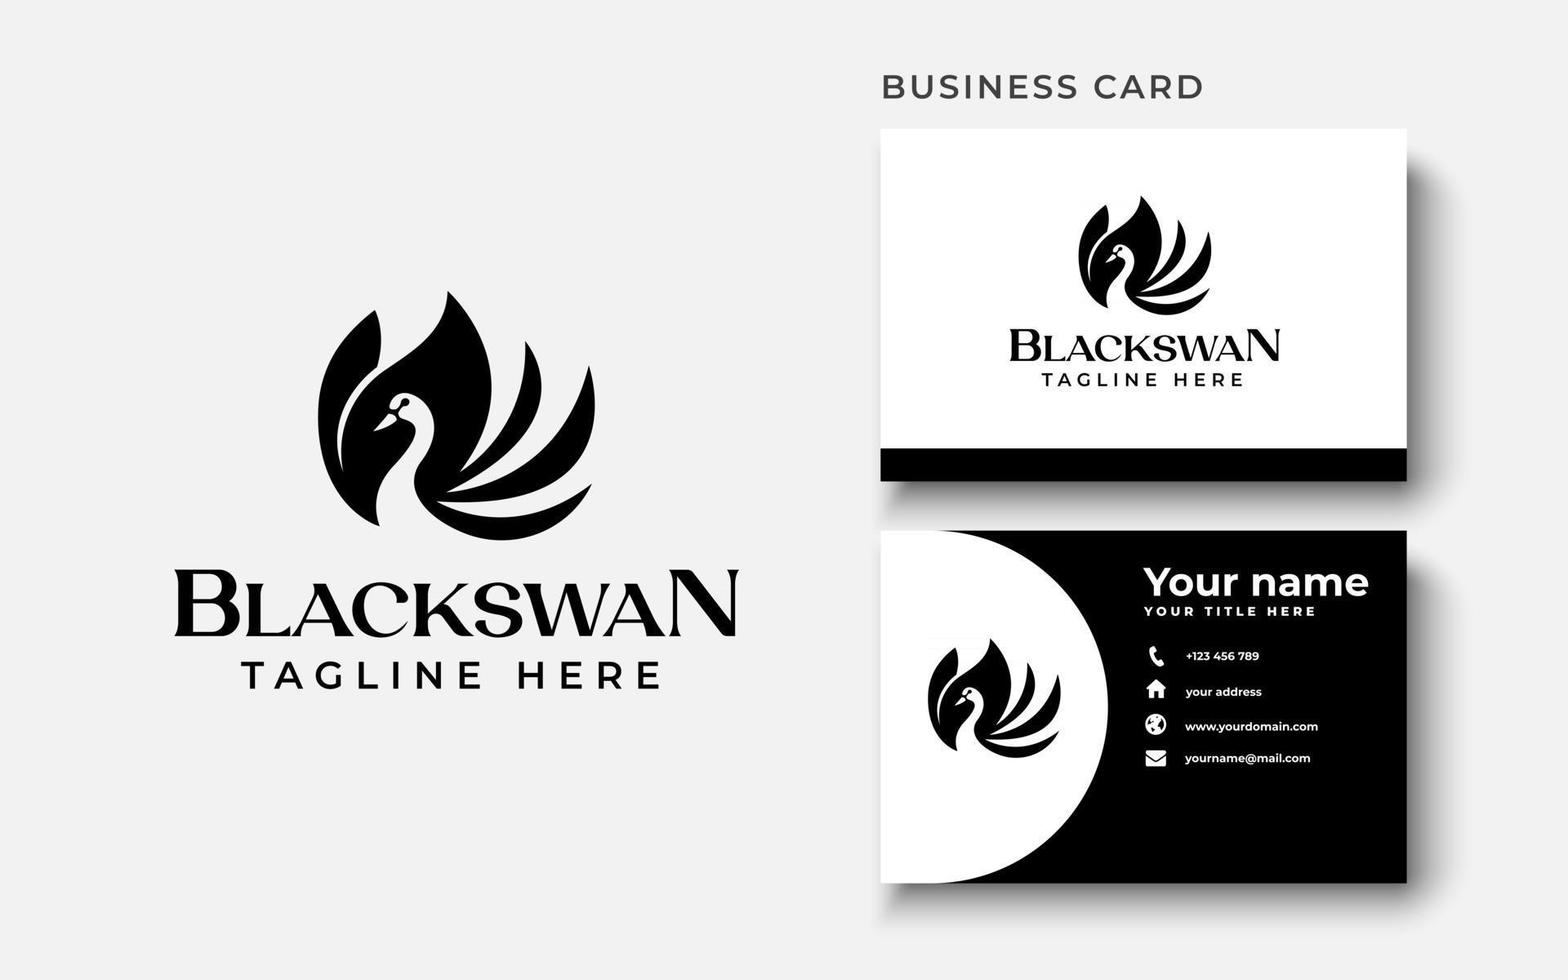 Black Swan Logo Template In Isolated White Background Vector Illustration